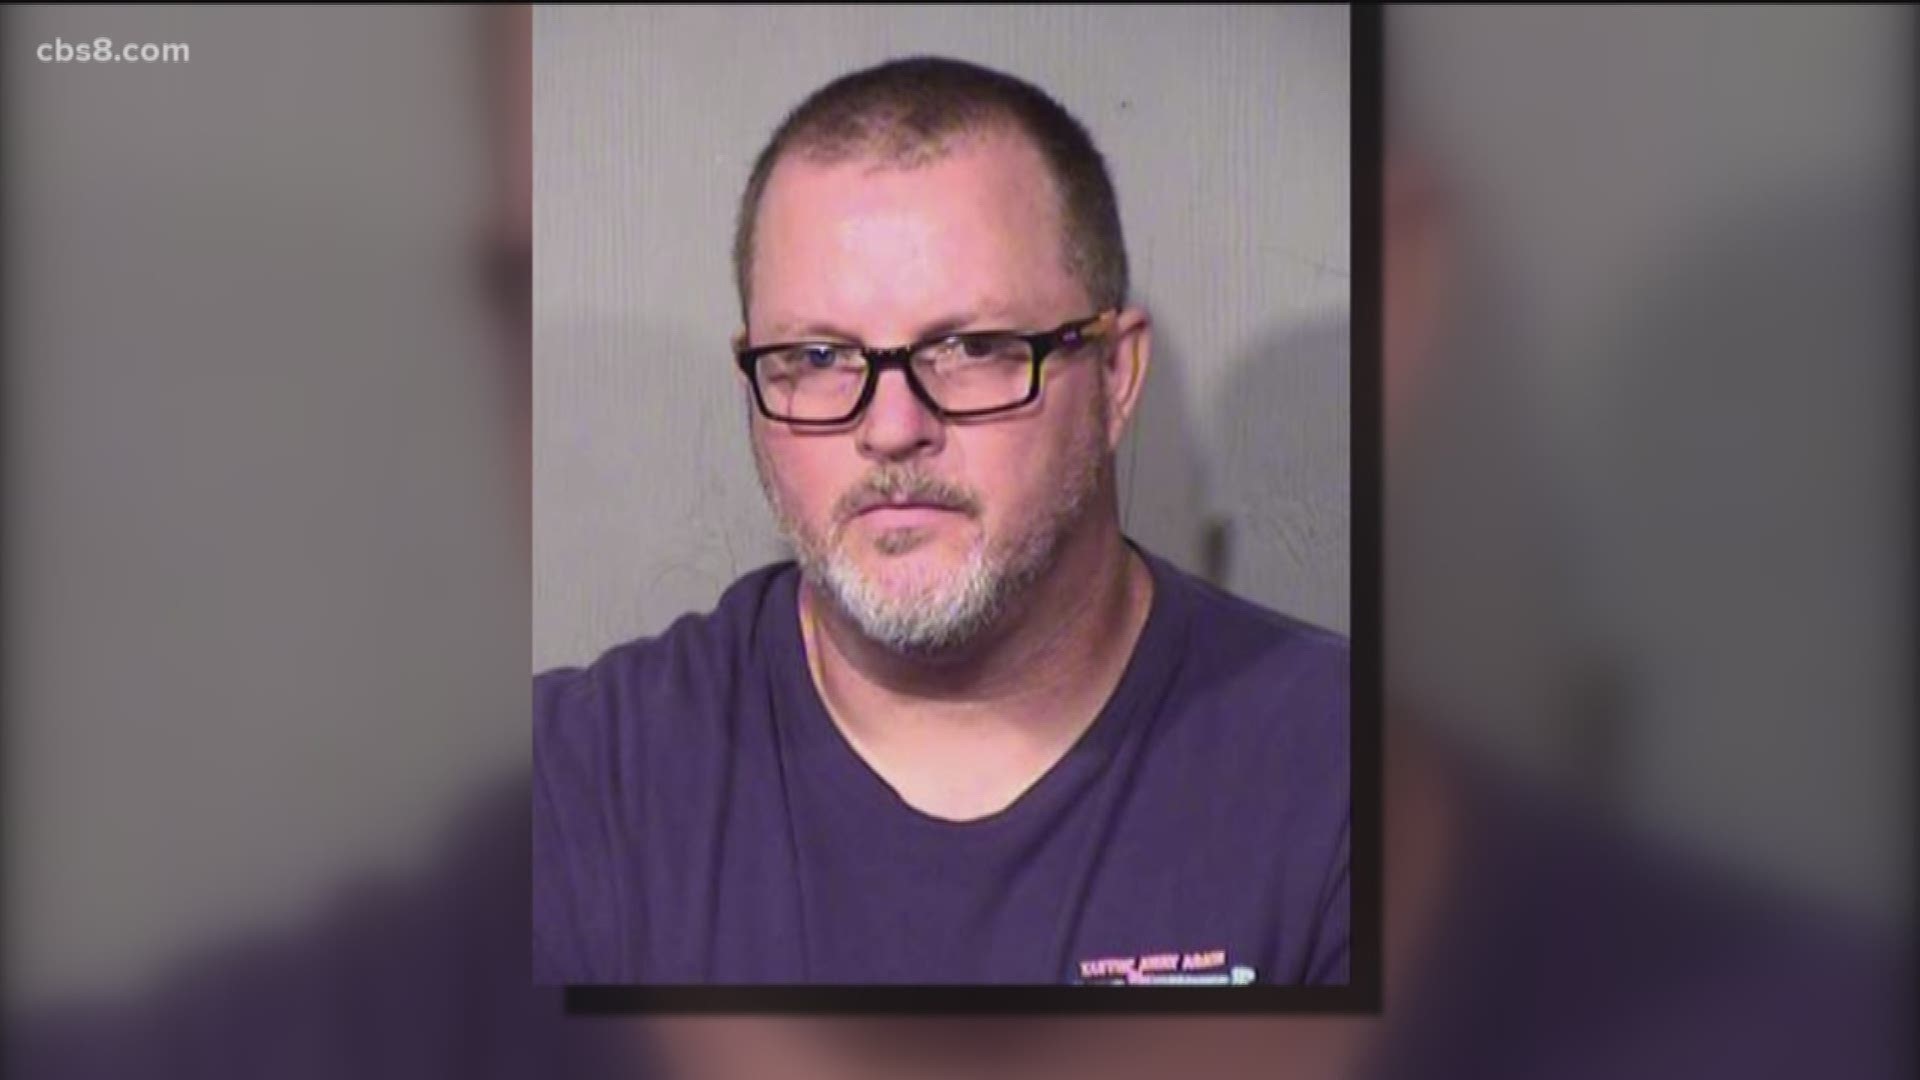 Christopher VanBuskirk, then in his early 20s, allegedly threatened his victims with a knife while sexually assaulting them on four occasions between August and November of 1995, according to San Diego police.